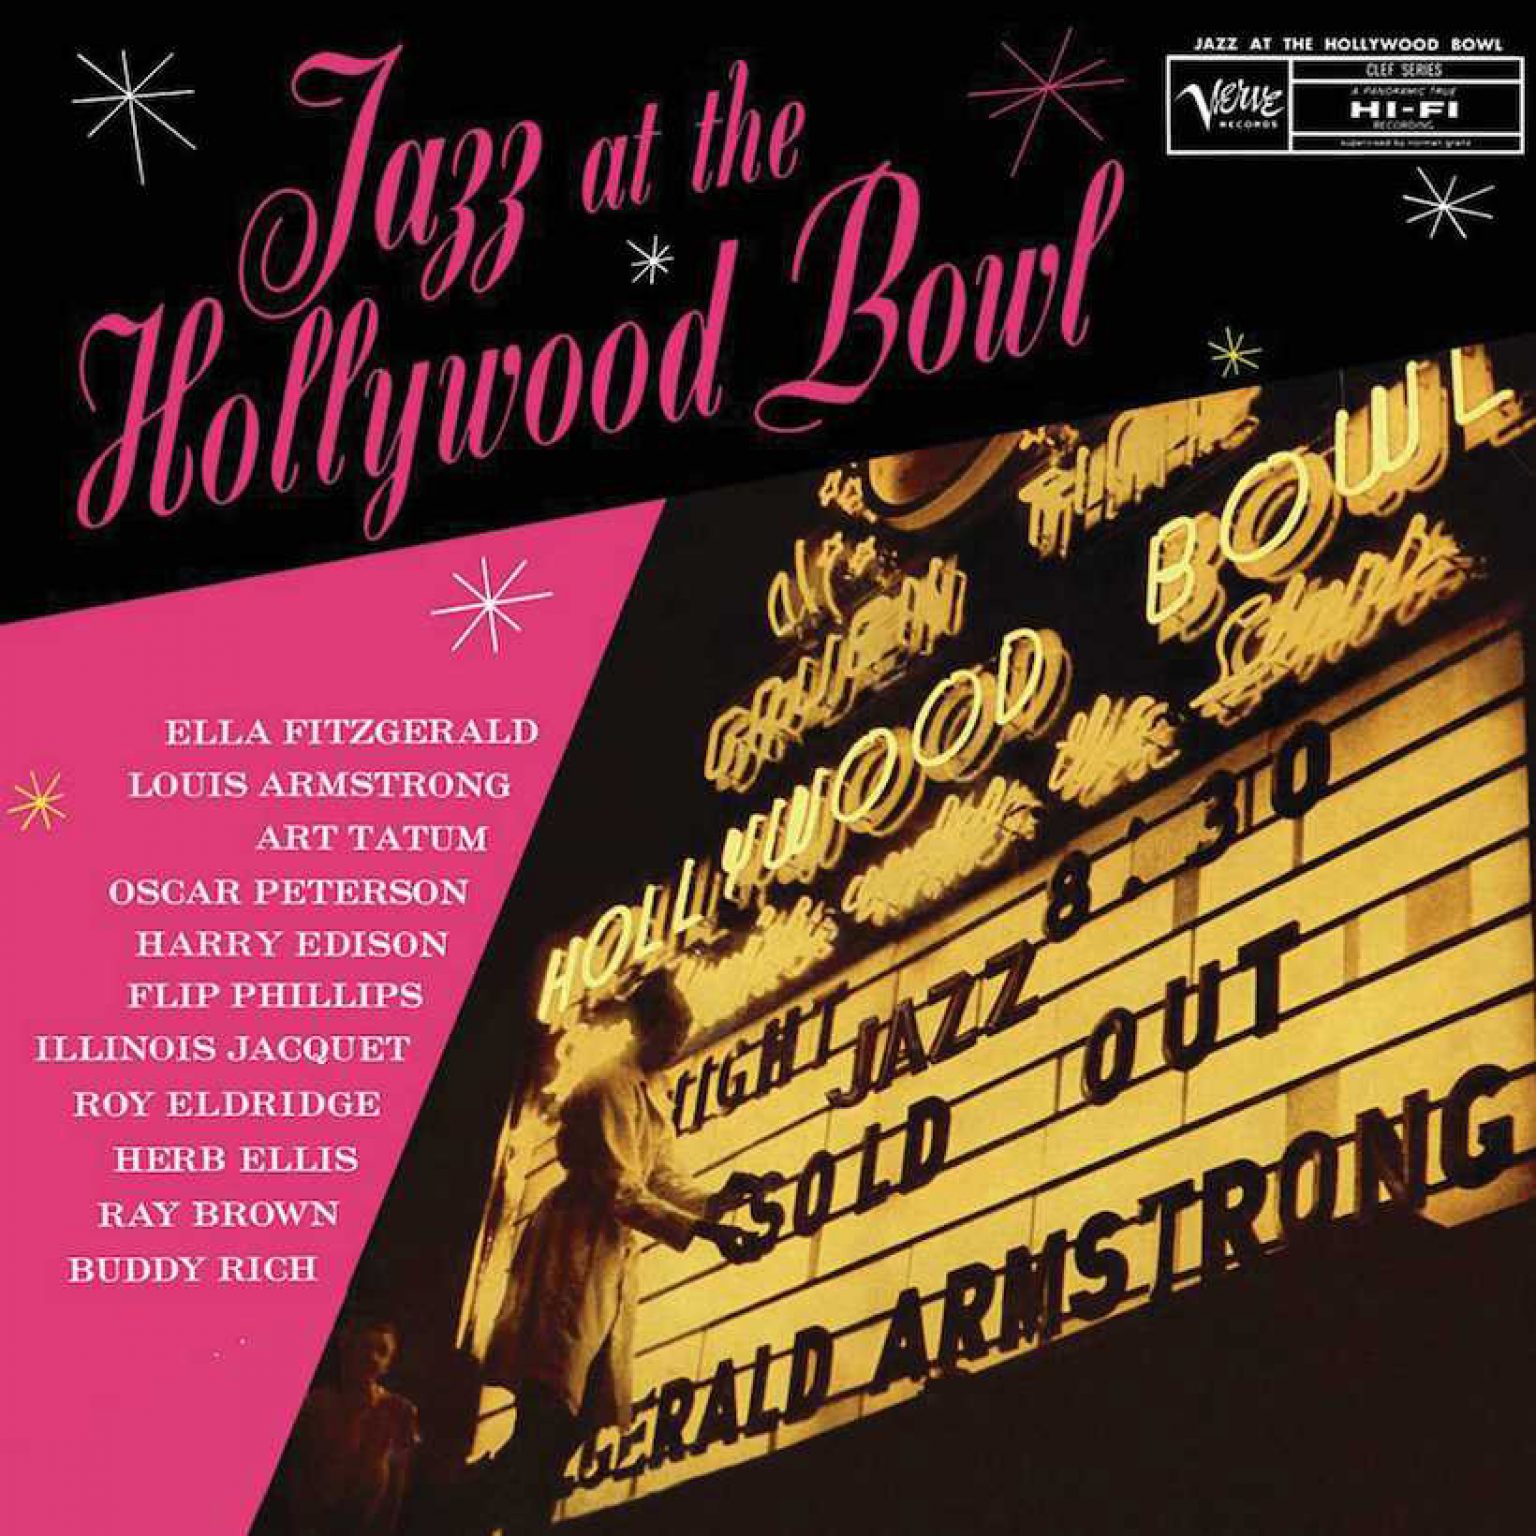 'Jazz At the Hollywood Bowl' When All The Jazz Stars Aligned